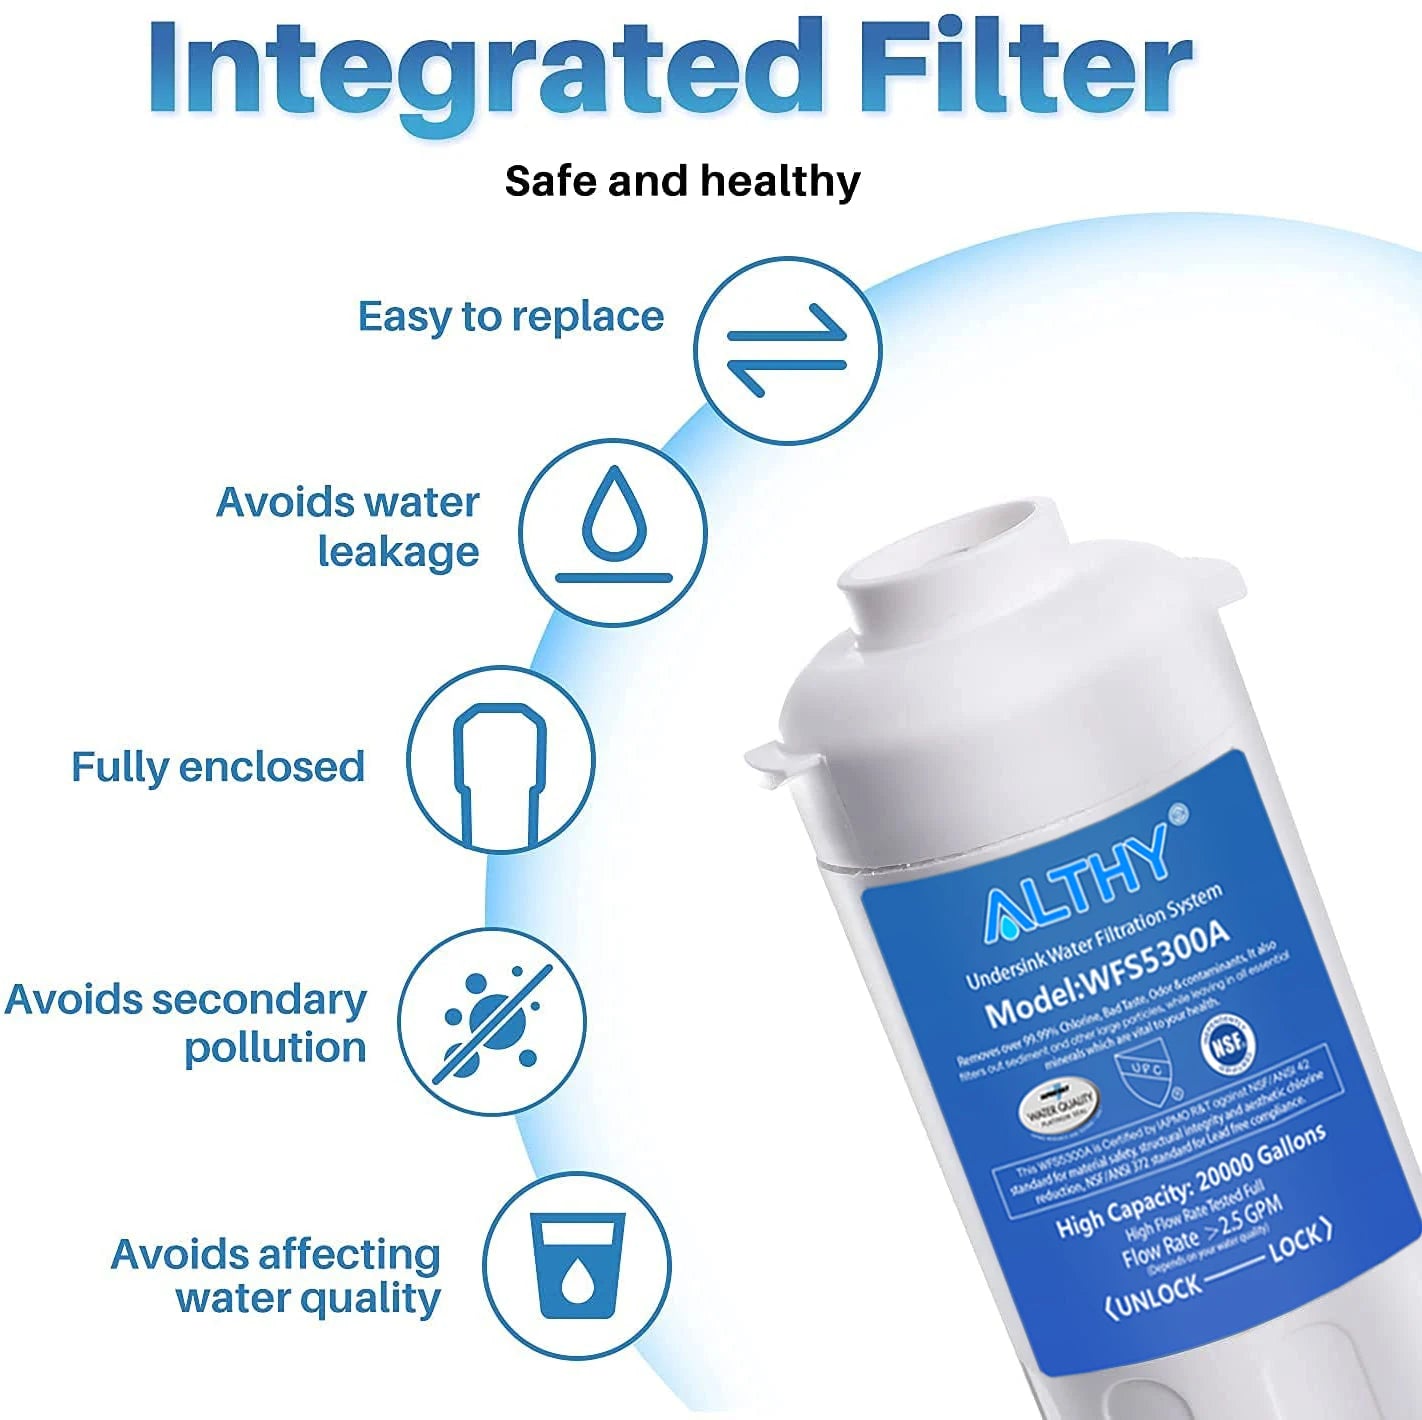 Replacement Water Filter For ALTHY WFS5300A Under Sink Drinking Direct Connect Under Counter Drink Water Filtration System